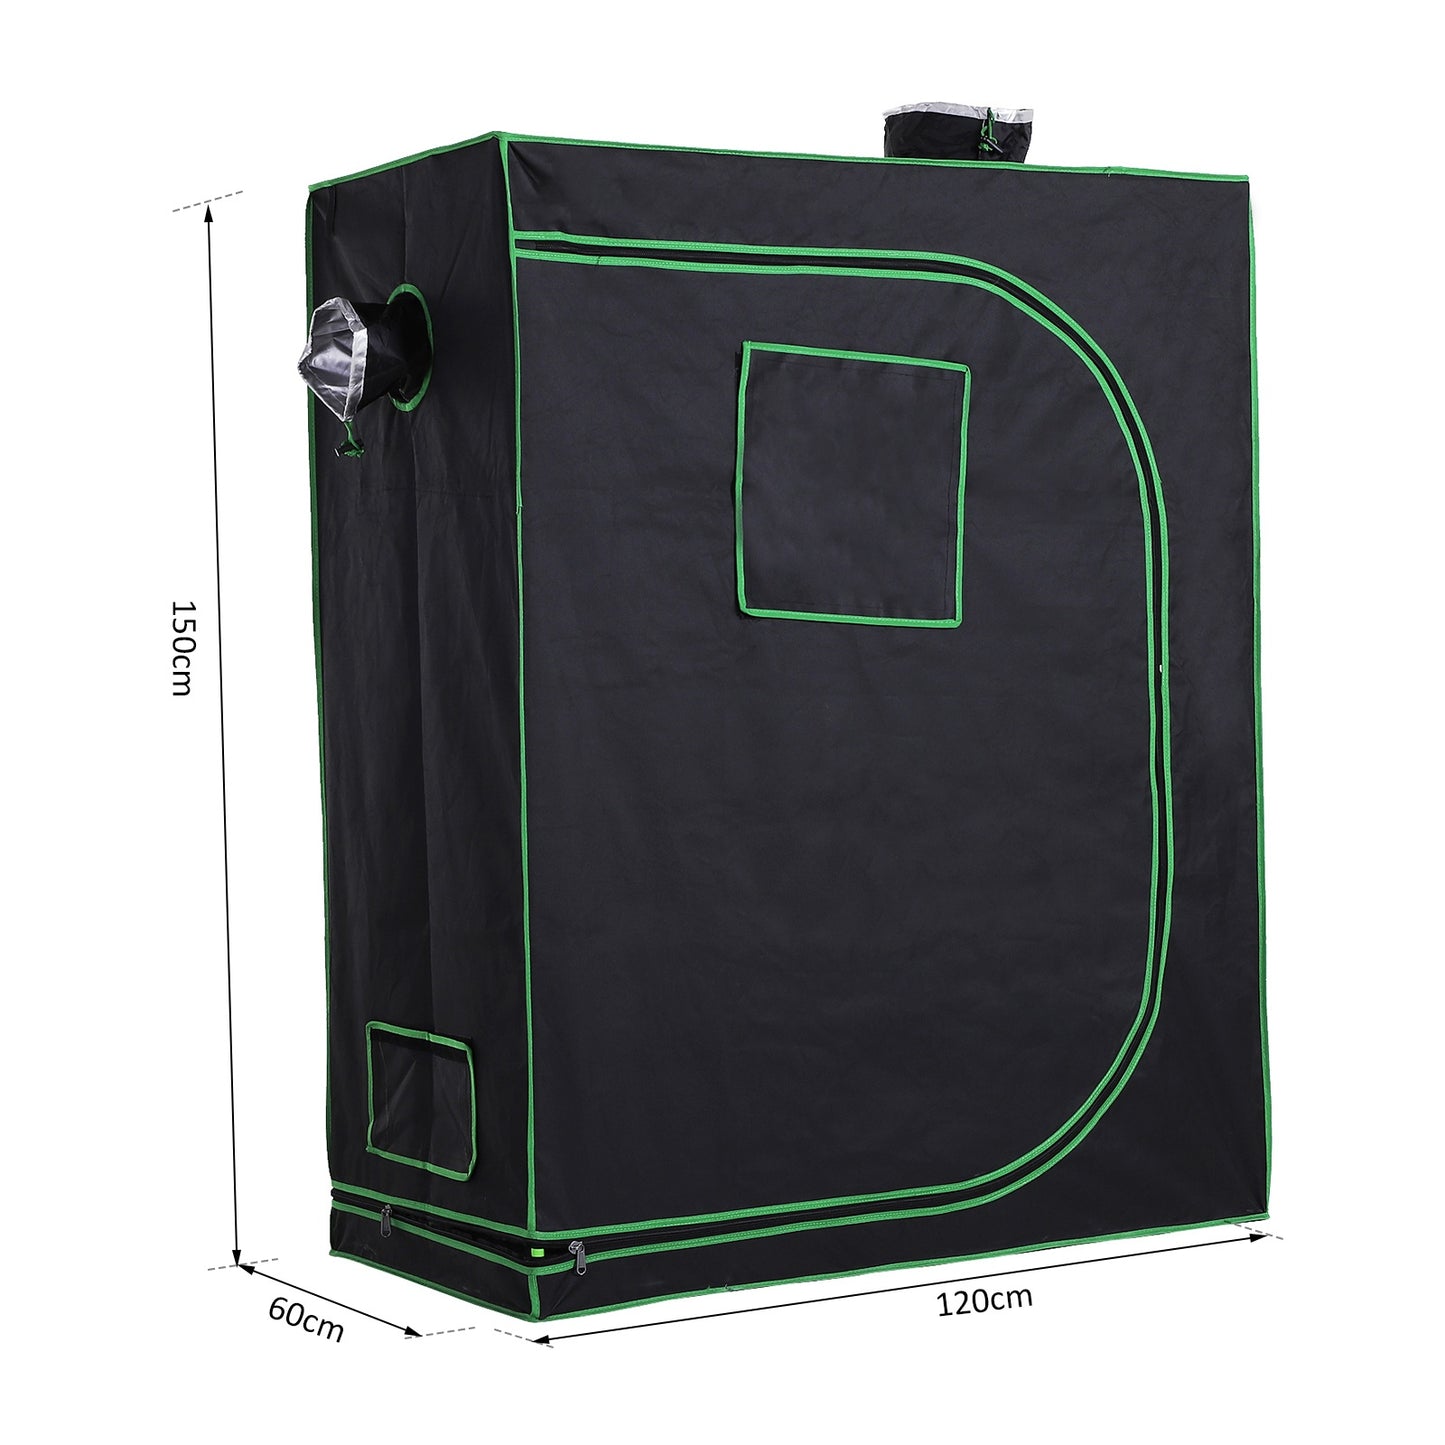 Outsunny Hydroponic Plant Grow Tent Canopy Indoor Reflective Mylar Green Room 600D Oxford 120L x60W x150Hcm Silver